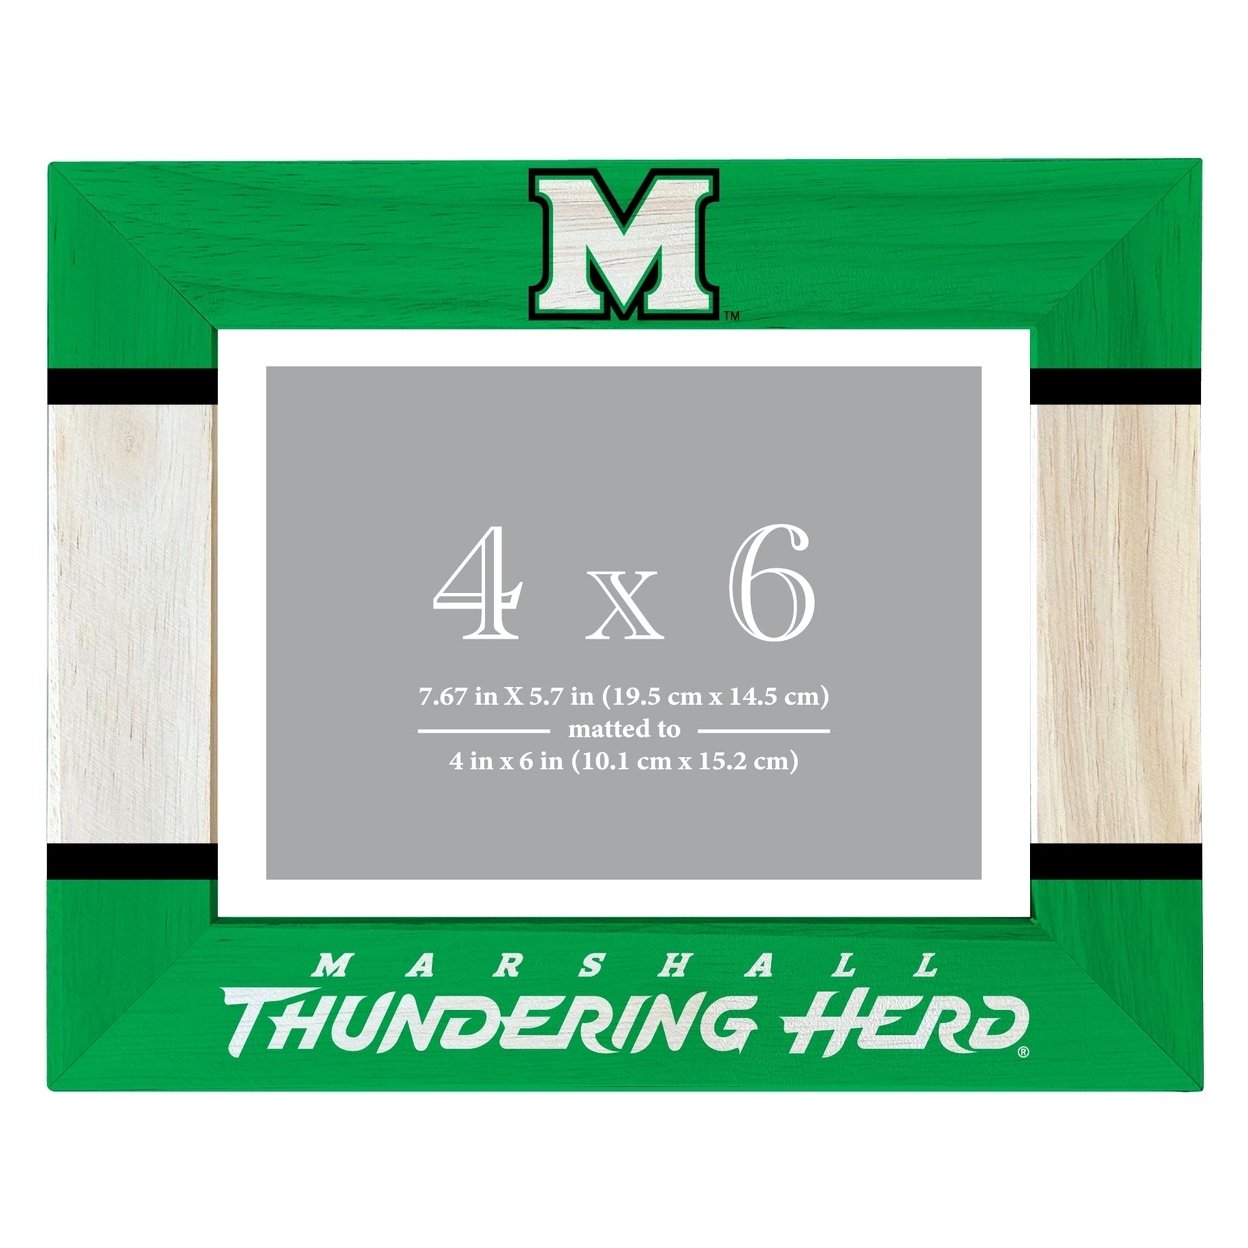 Marshall Thundering Herd Wooden Photo Frame Matted To 4 X 6 Inch - Printed